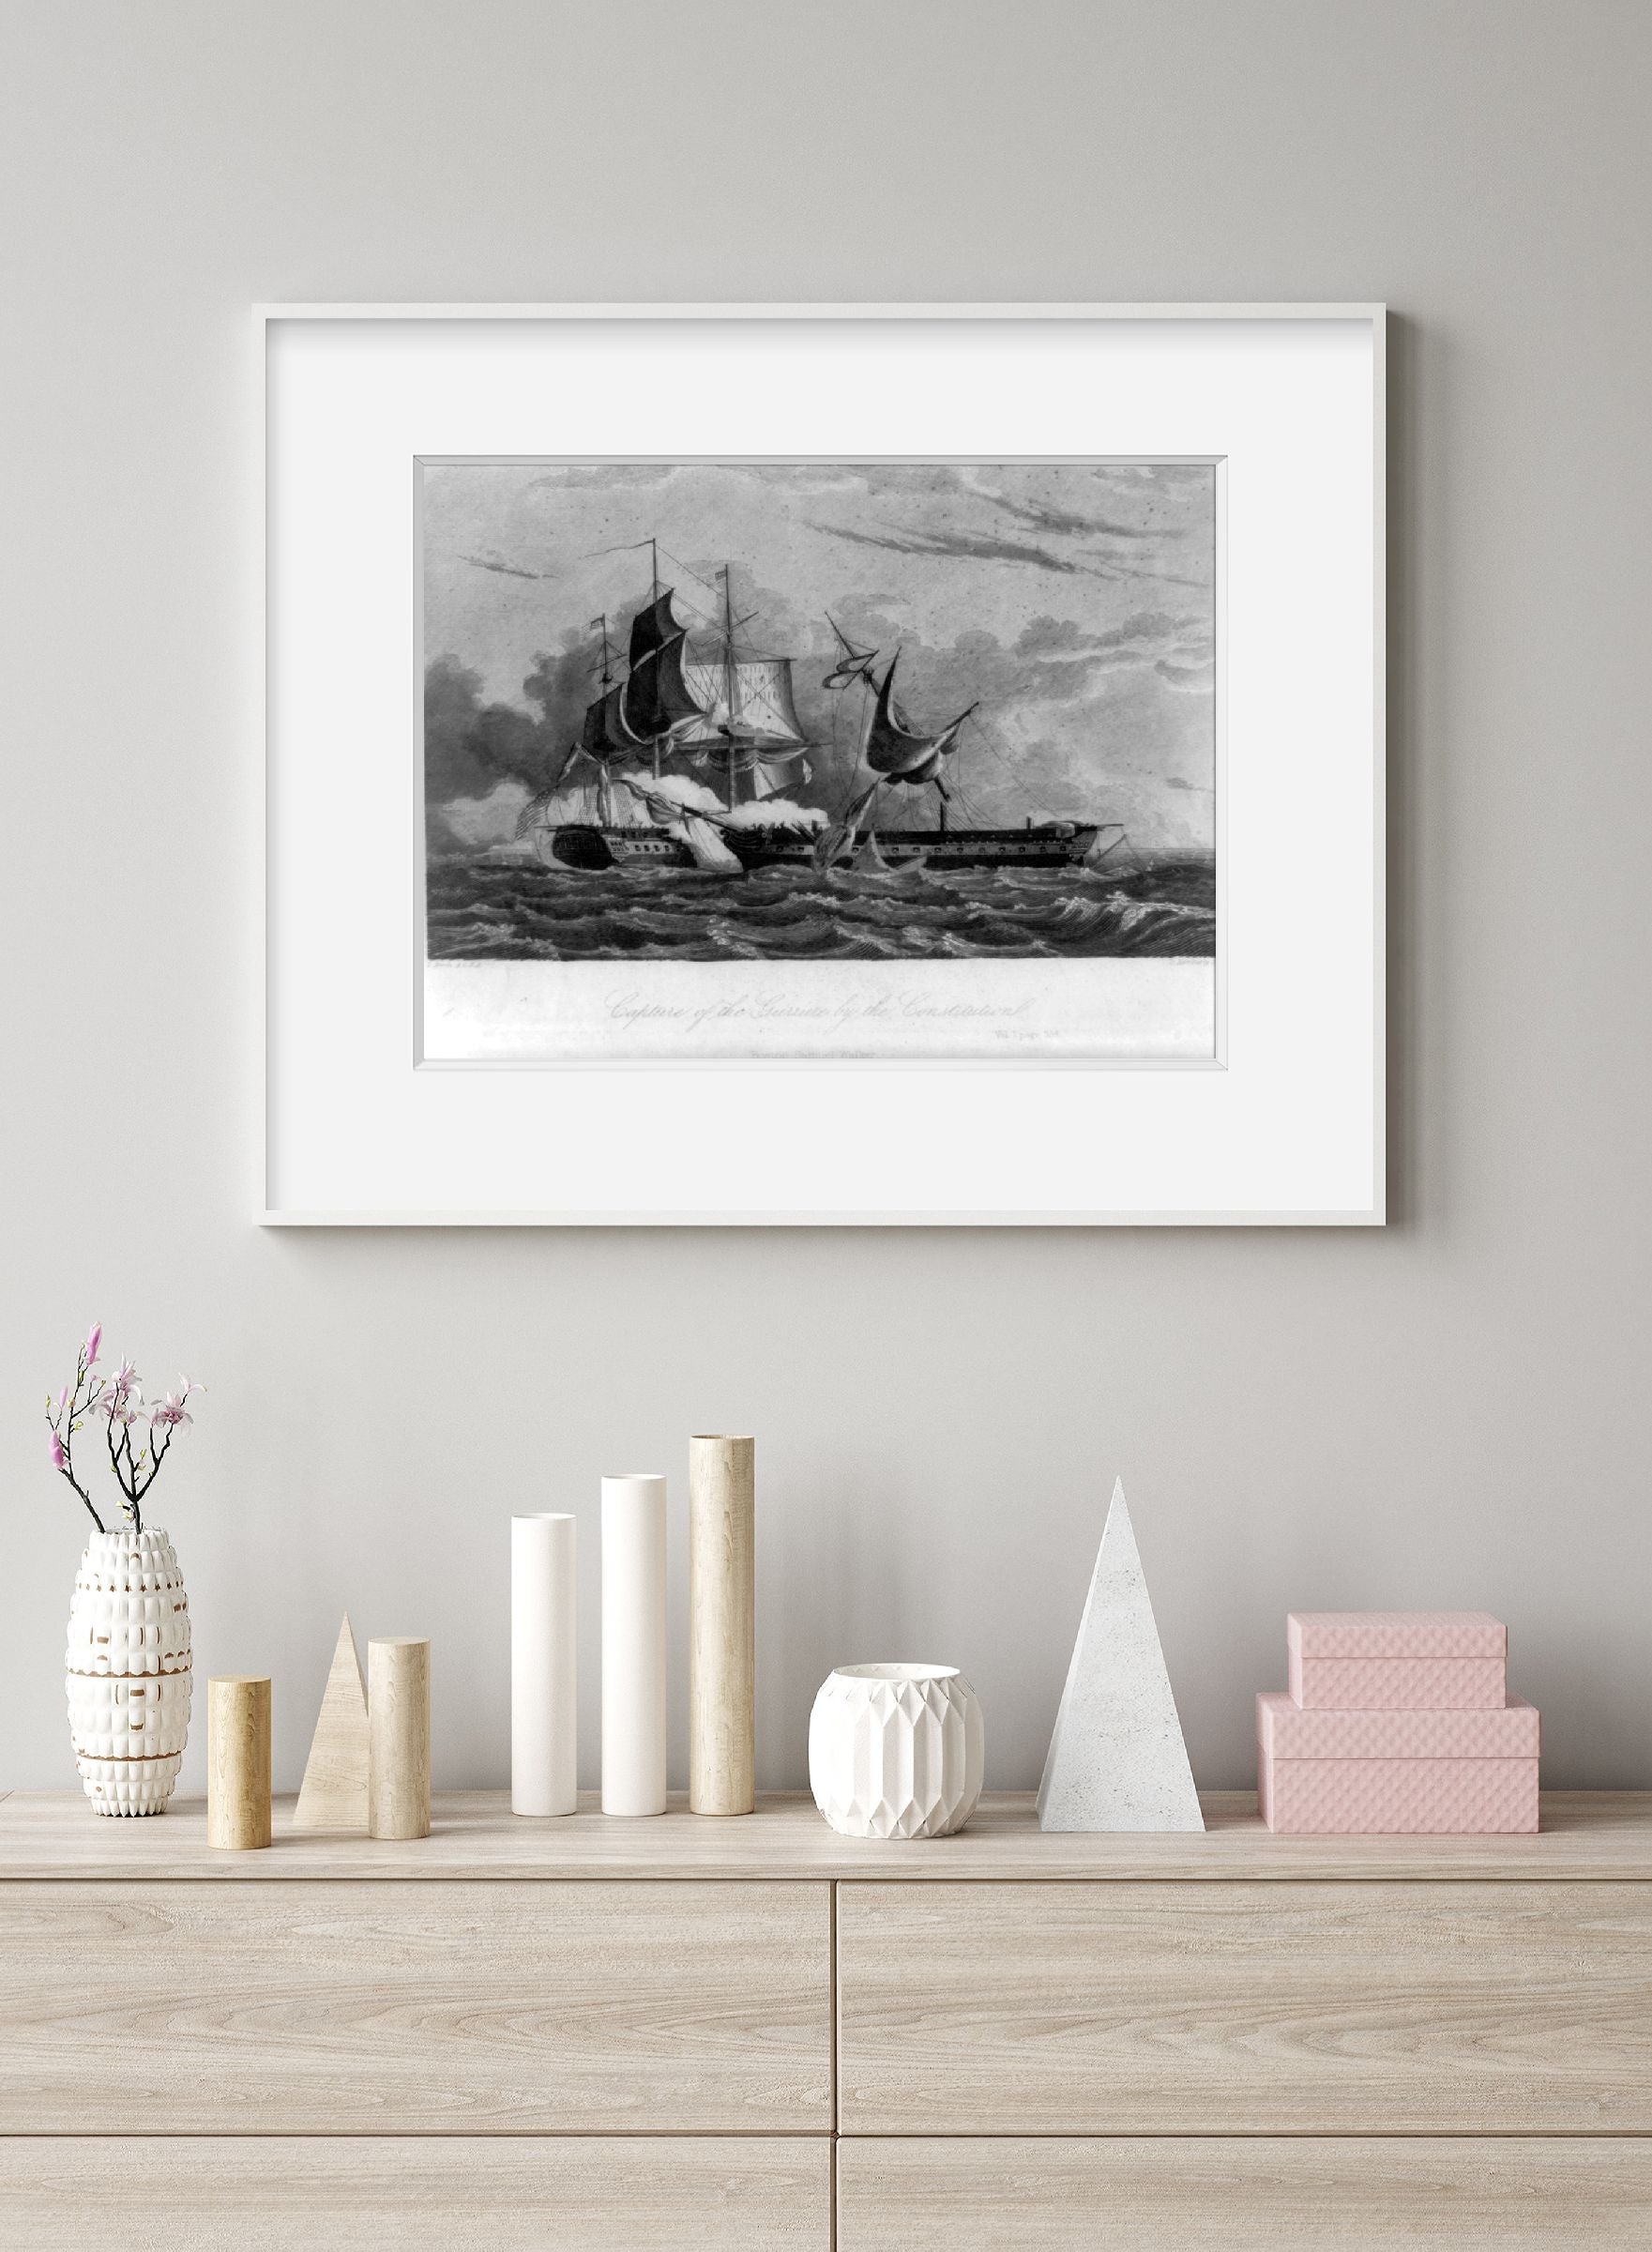 Photo: Capture of HMS GUERRIER by CONSTITUTION, War of 1812, Naval Warfare, ship